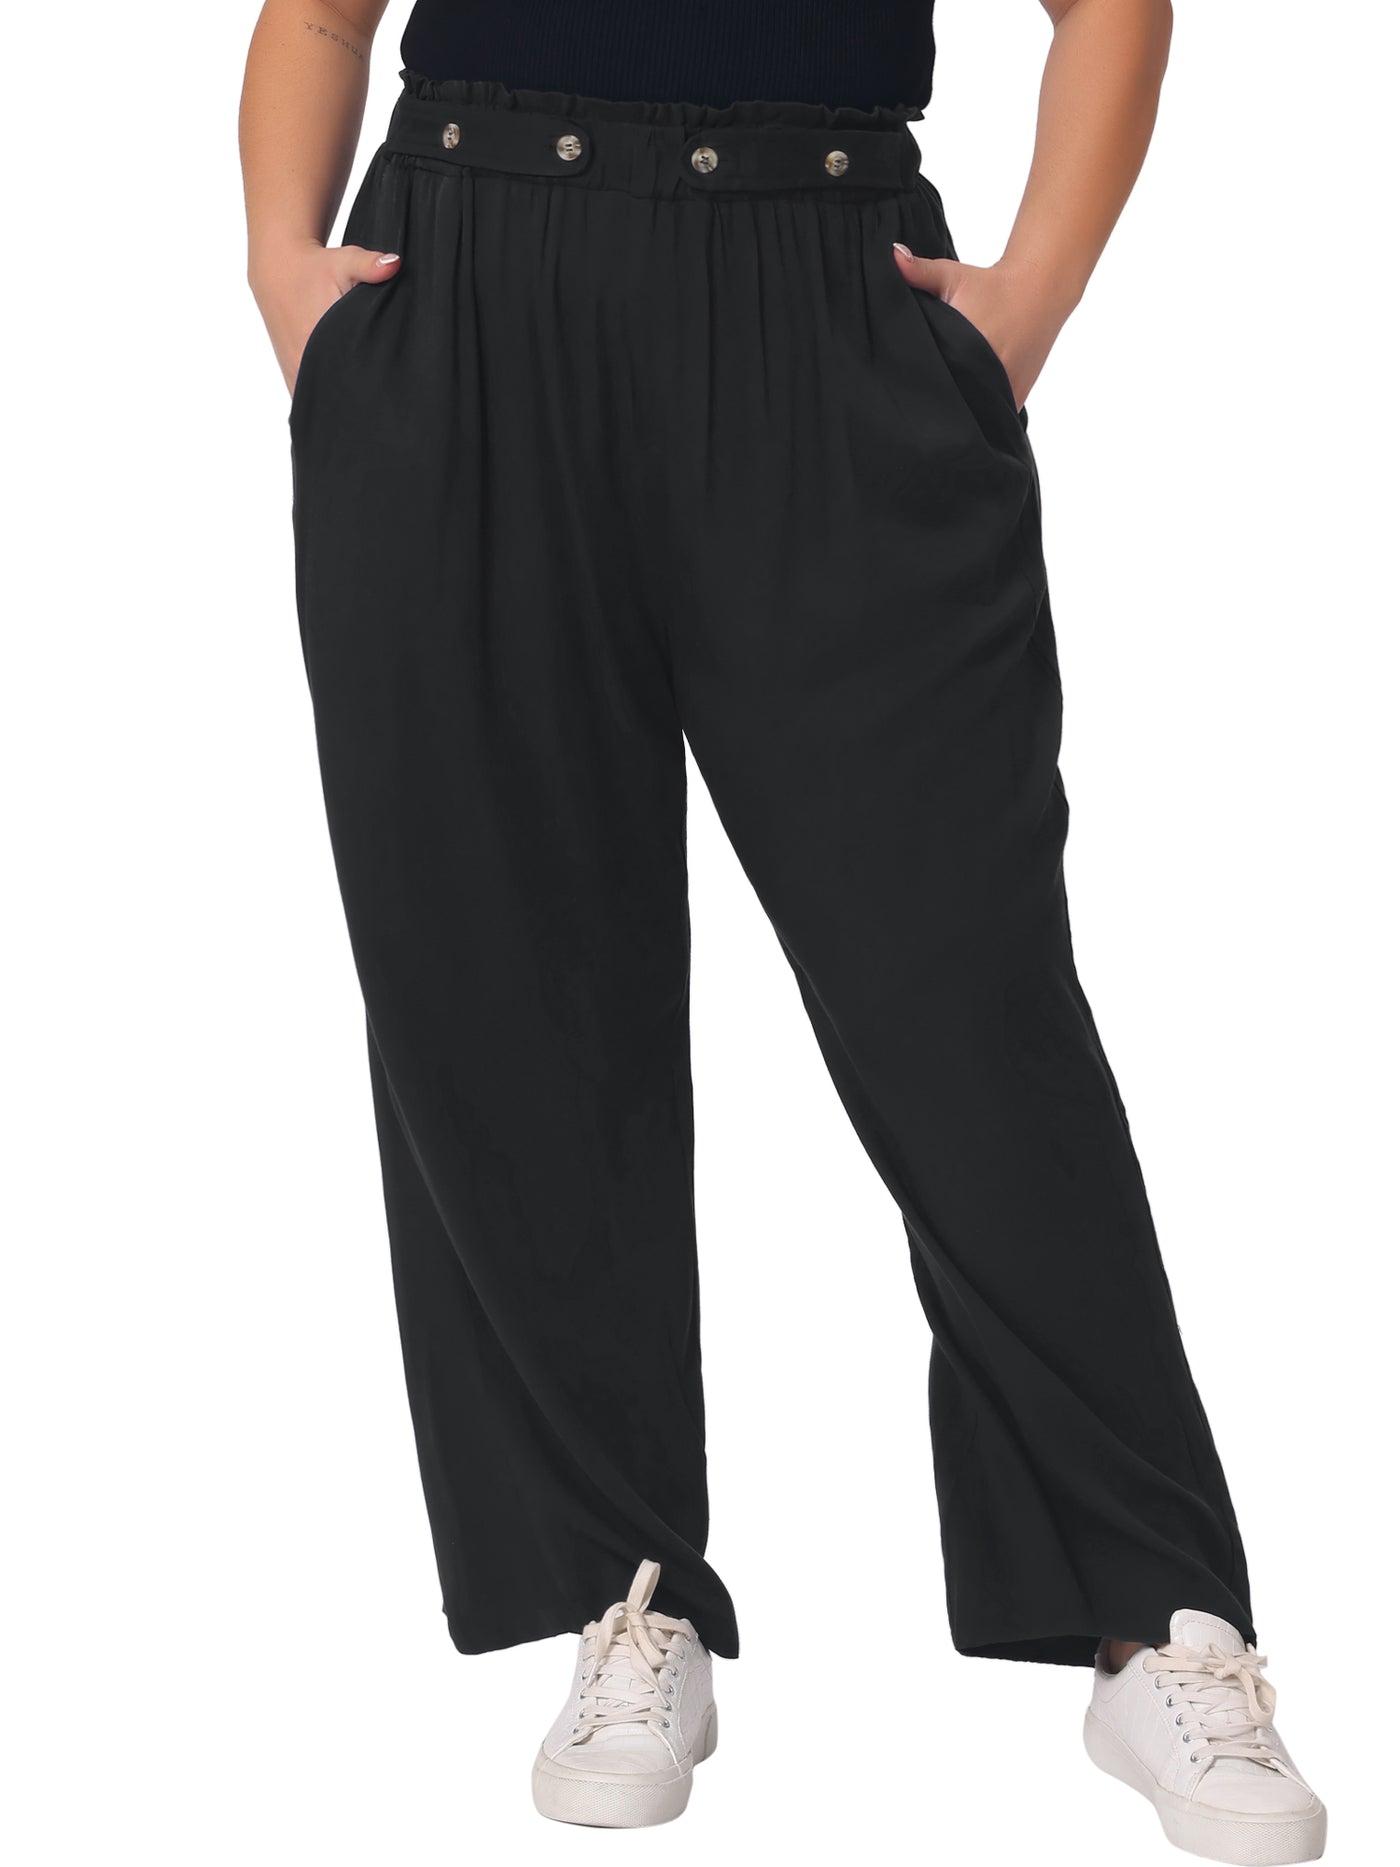 Bublédon Plus Size Palazzo Stretchy High Waisted with Pocket Wide Leg Pants